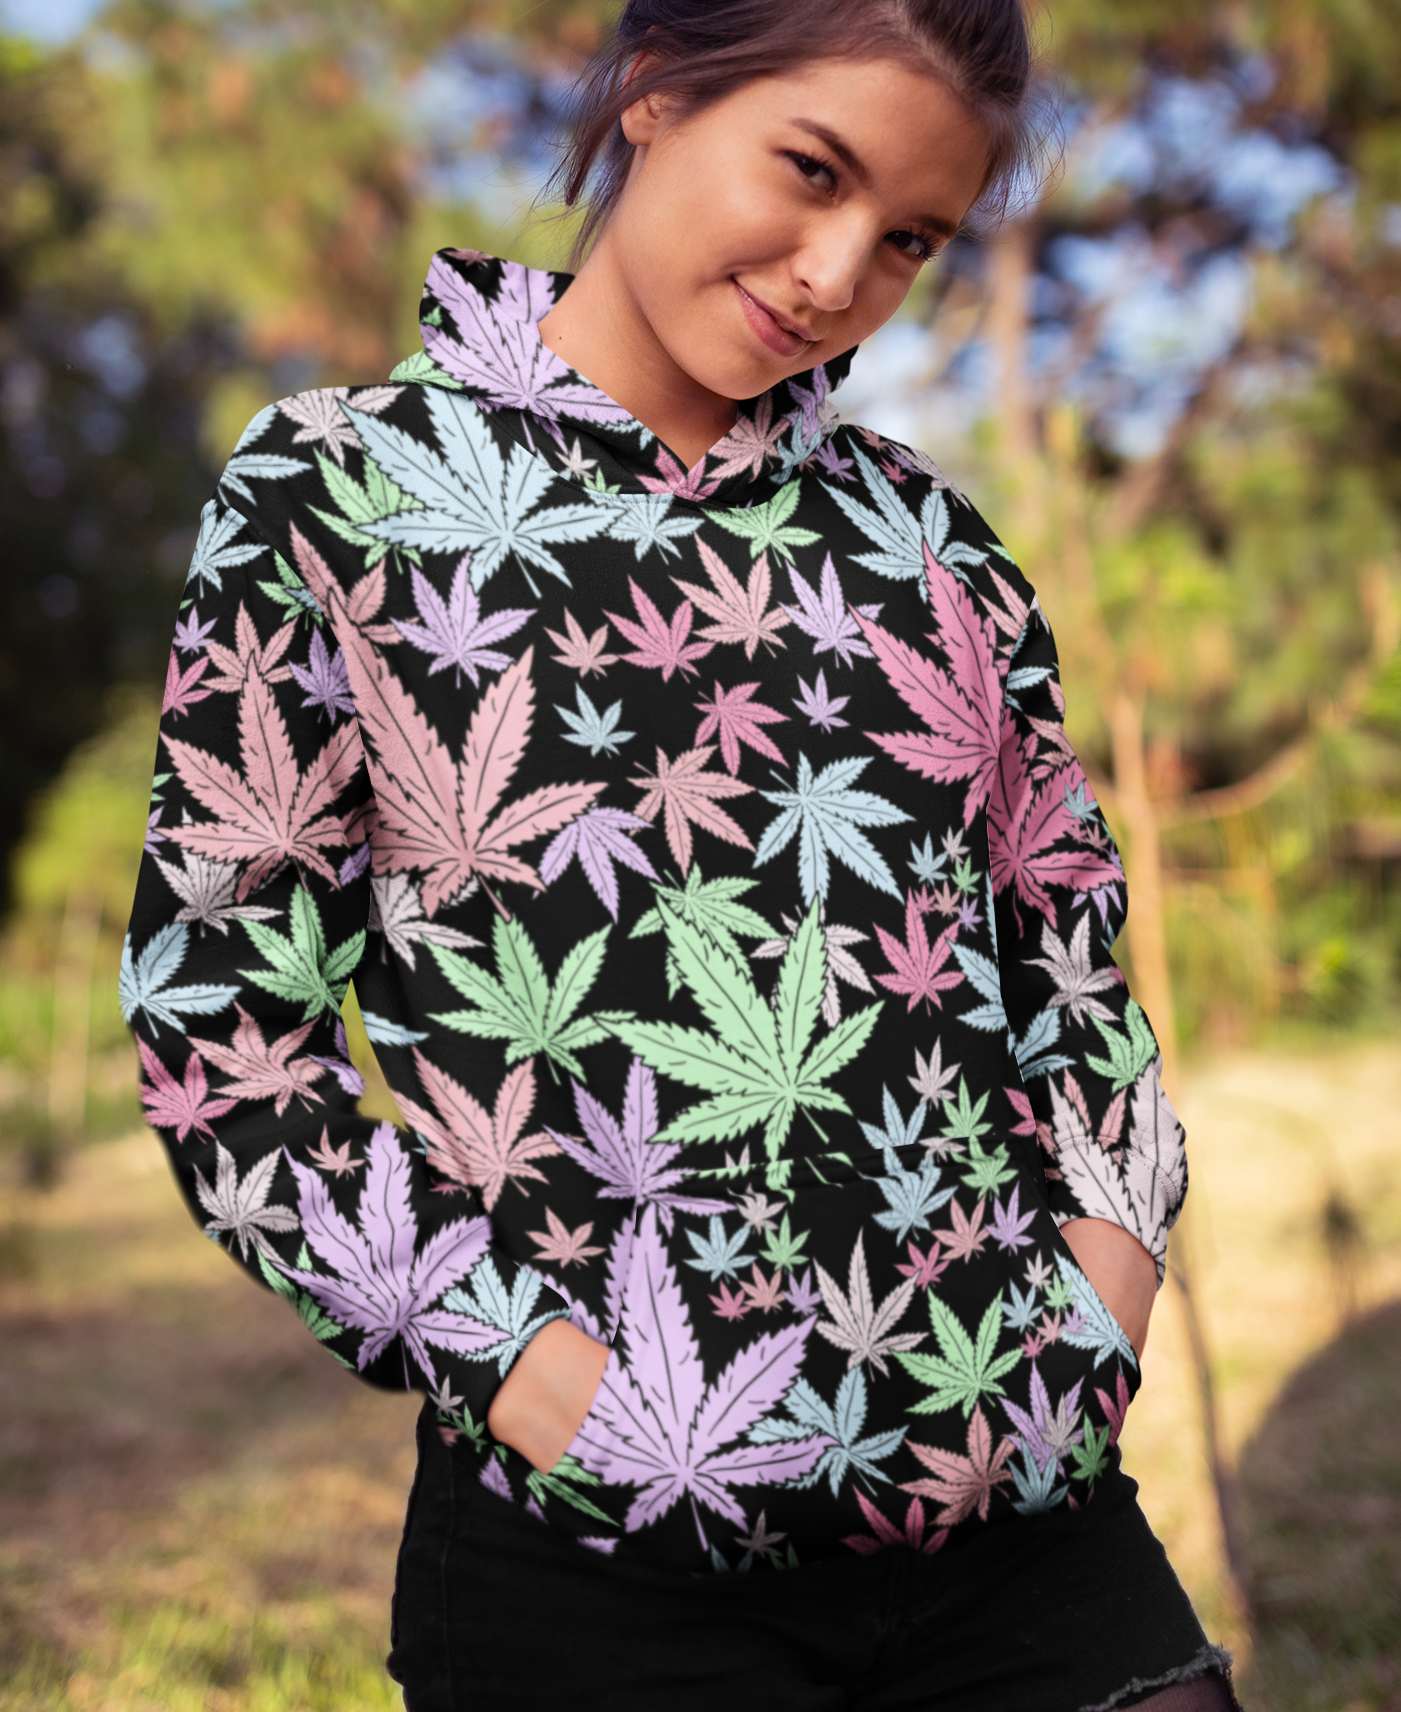 Black hoodie with weed leaves all over it - HighCiti